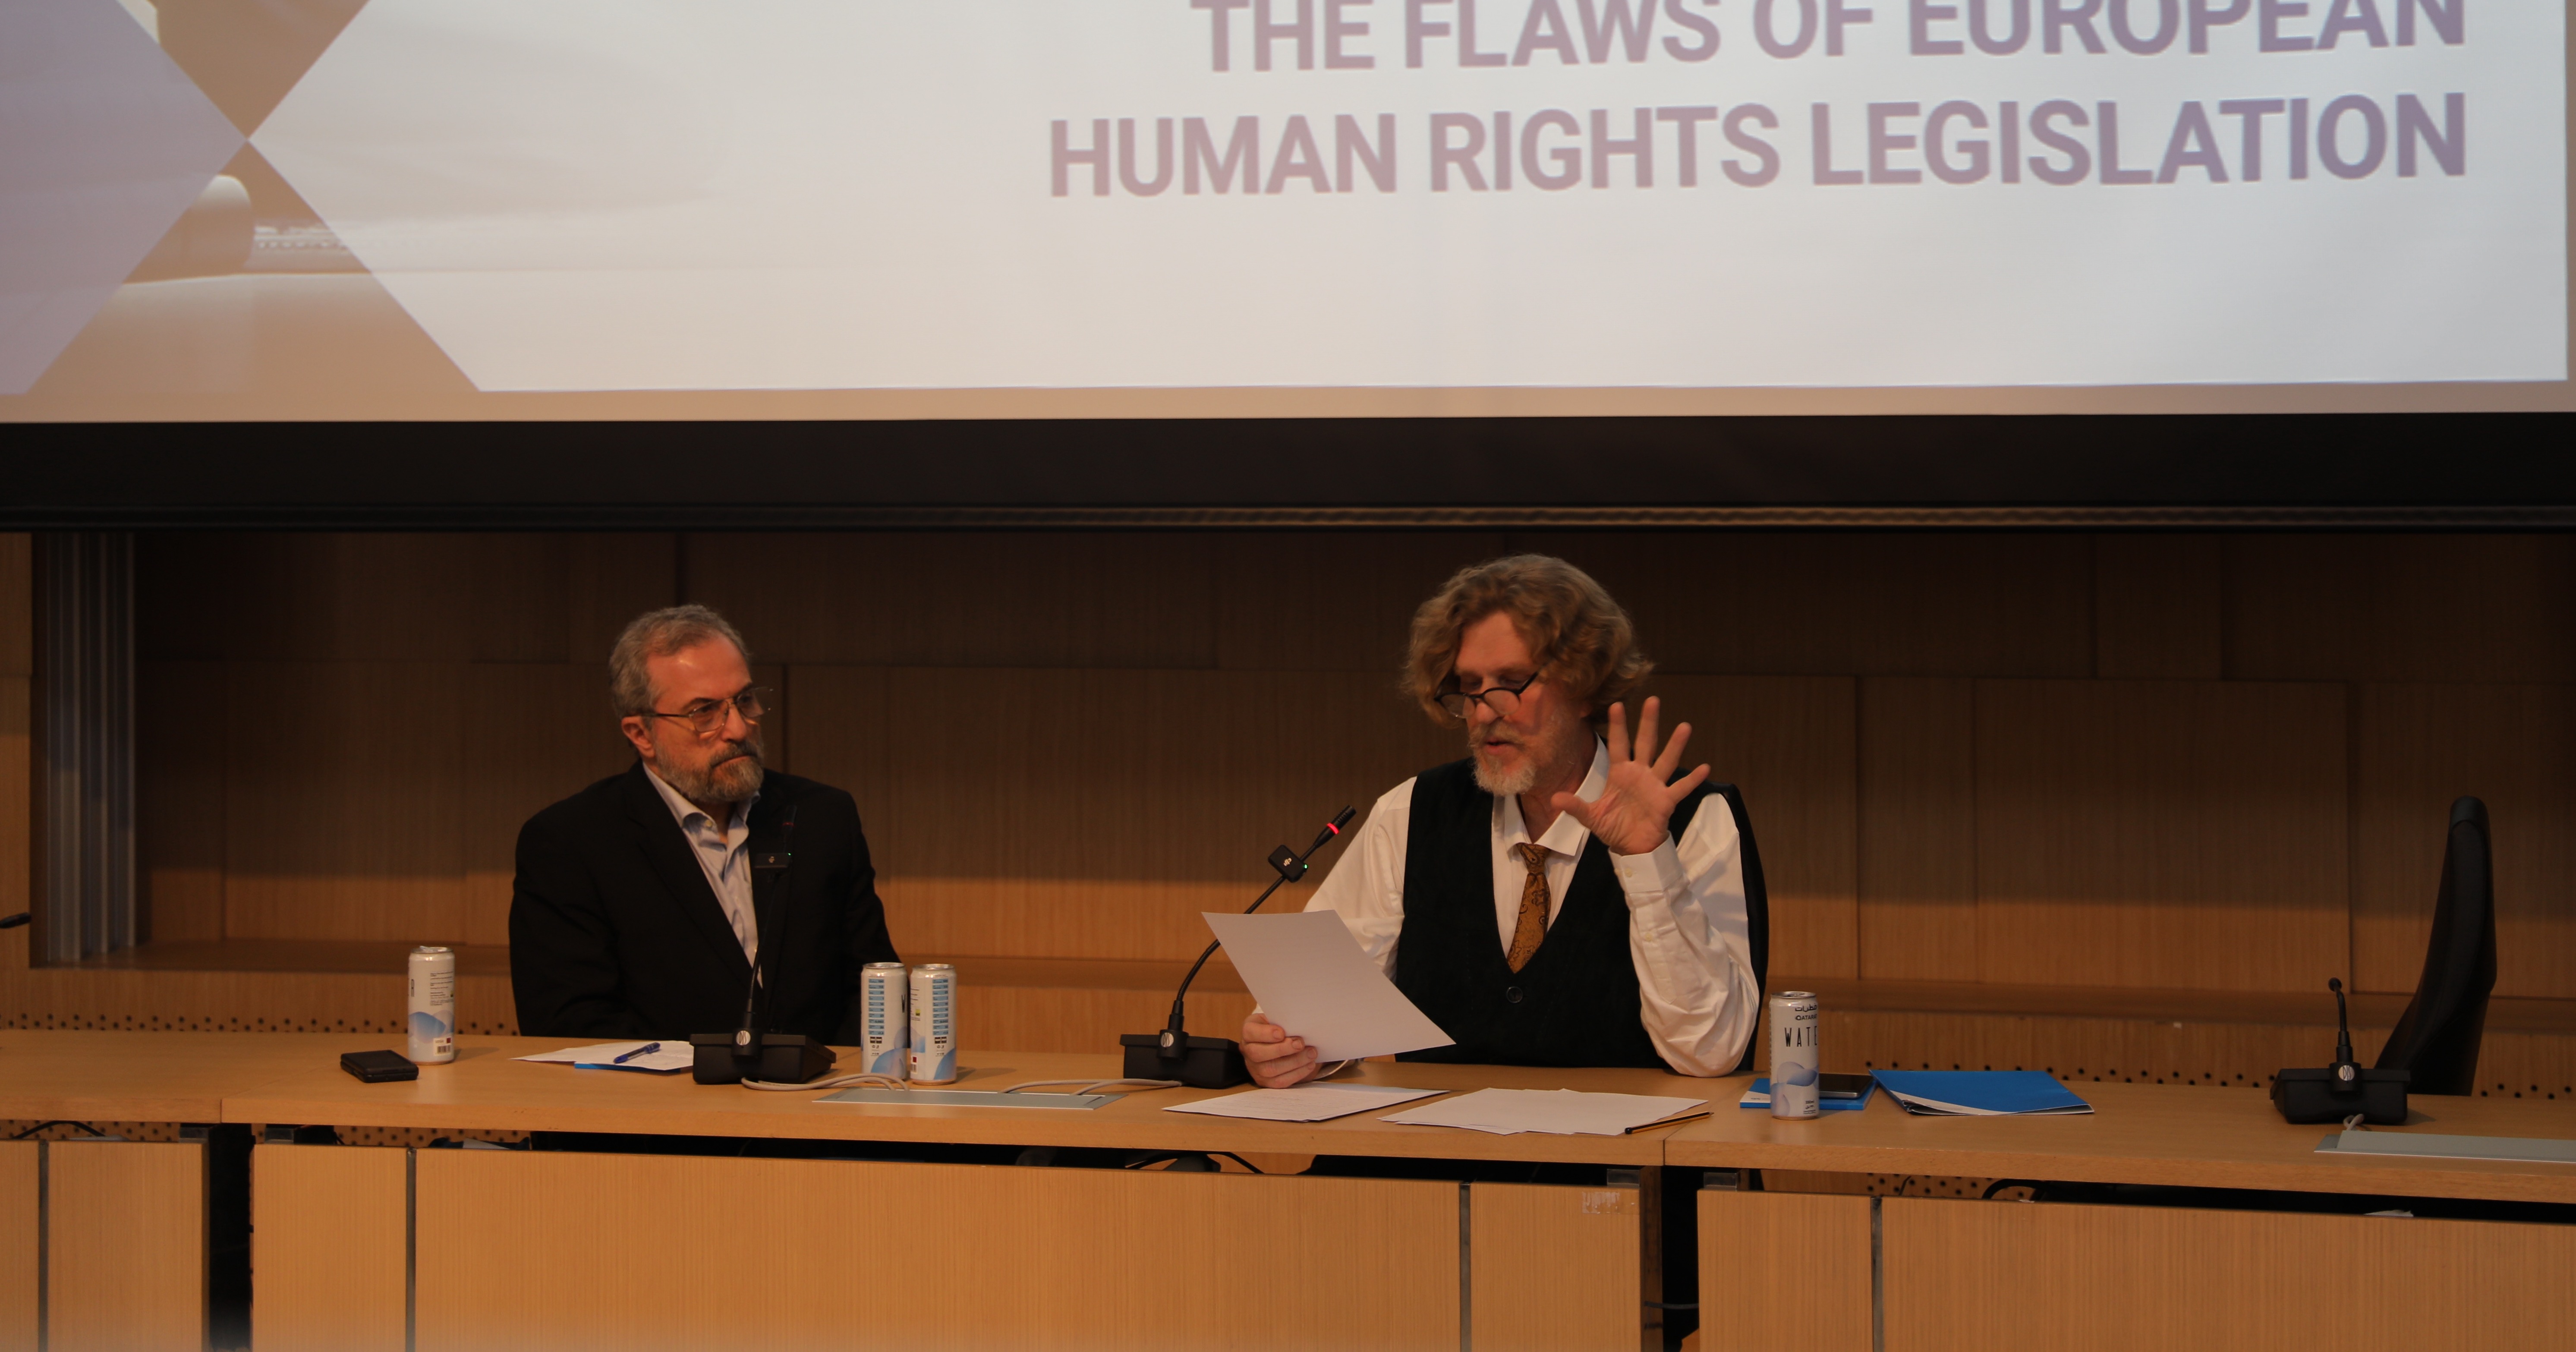 HBKU’s CIS Organizes Lecture Exploring Right to Belief...